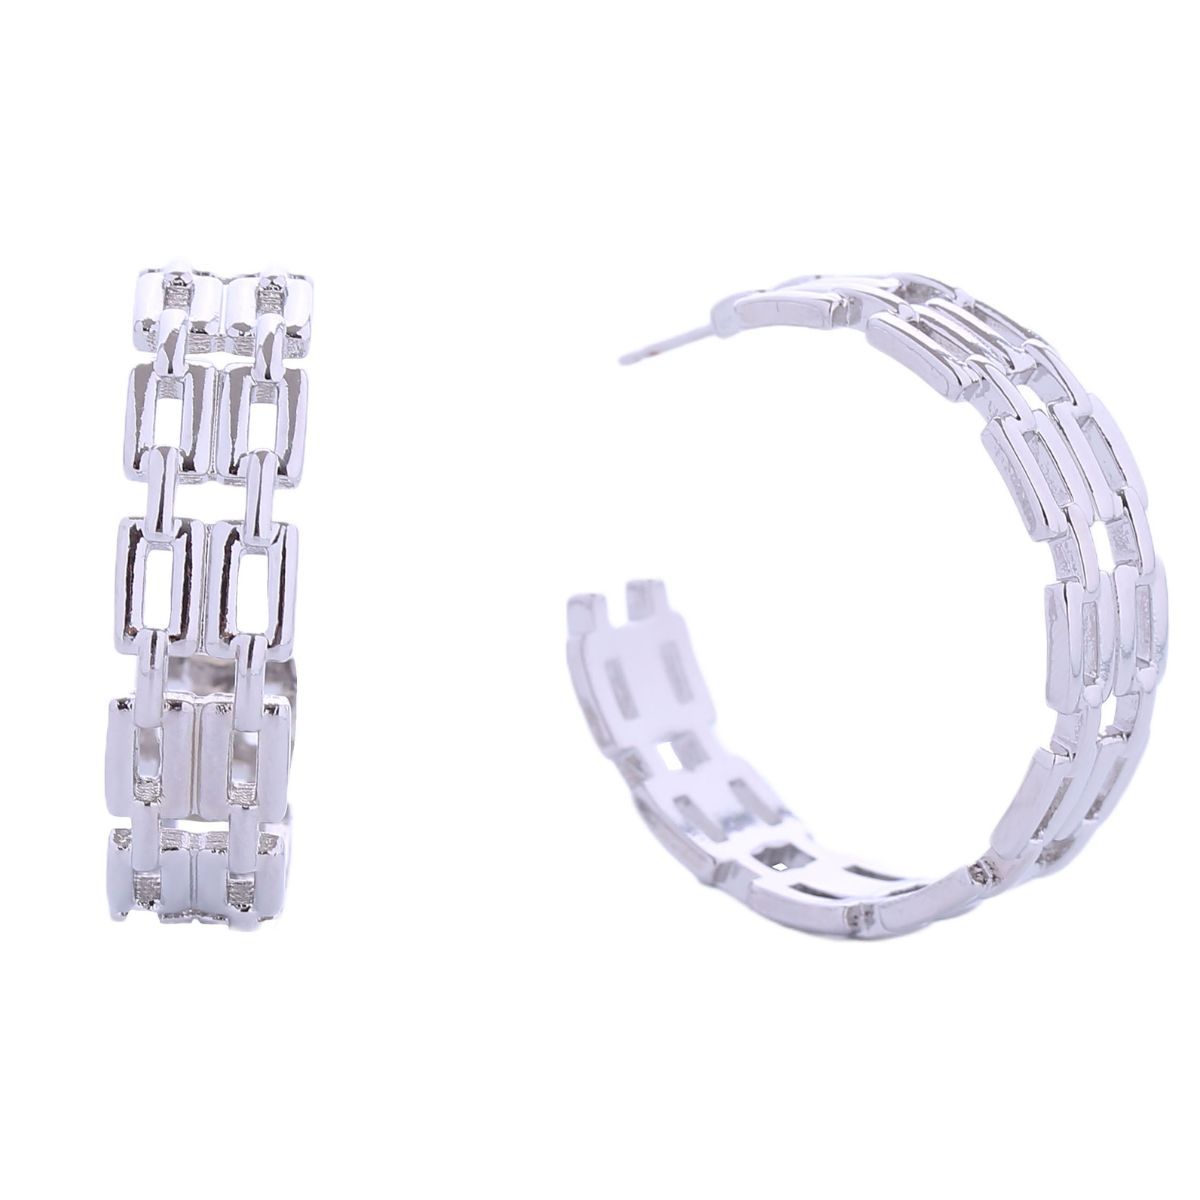 Hoop White Gold Small Chain Link Earring for Women